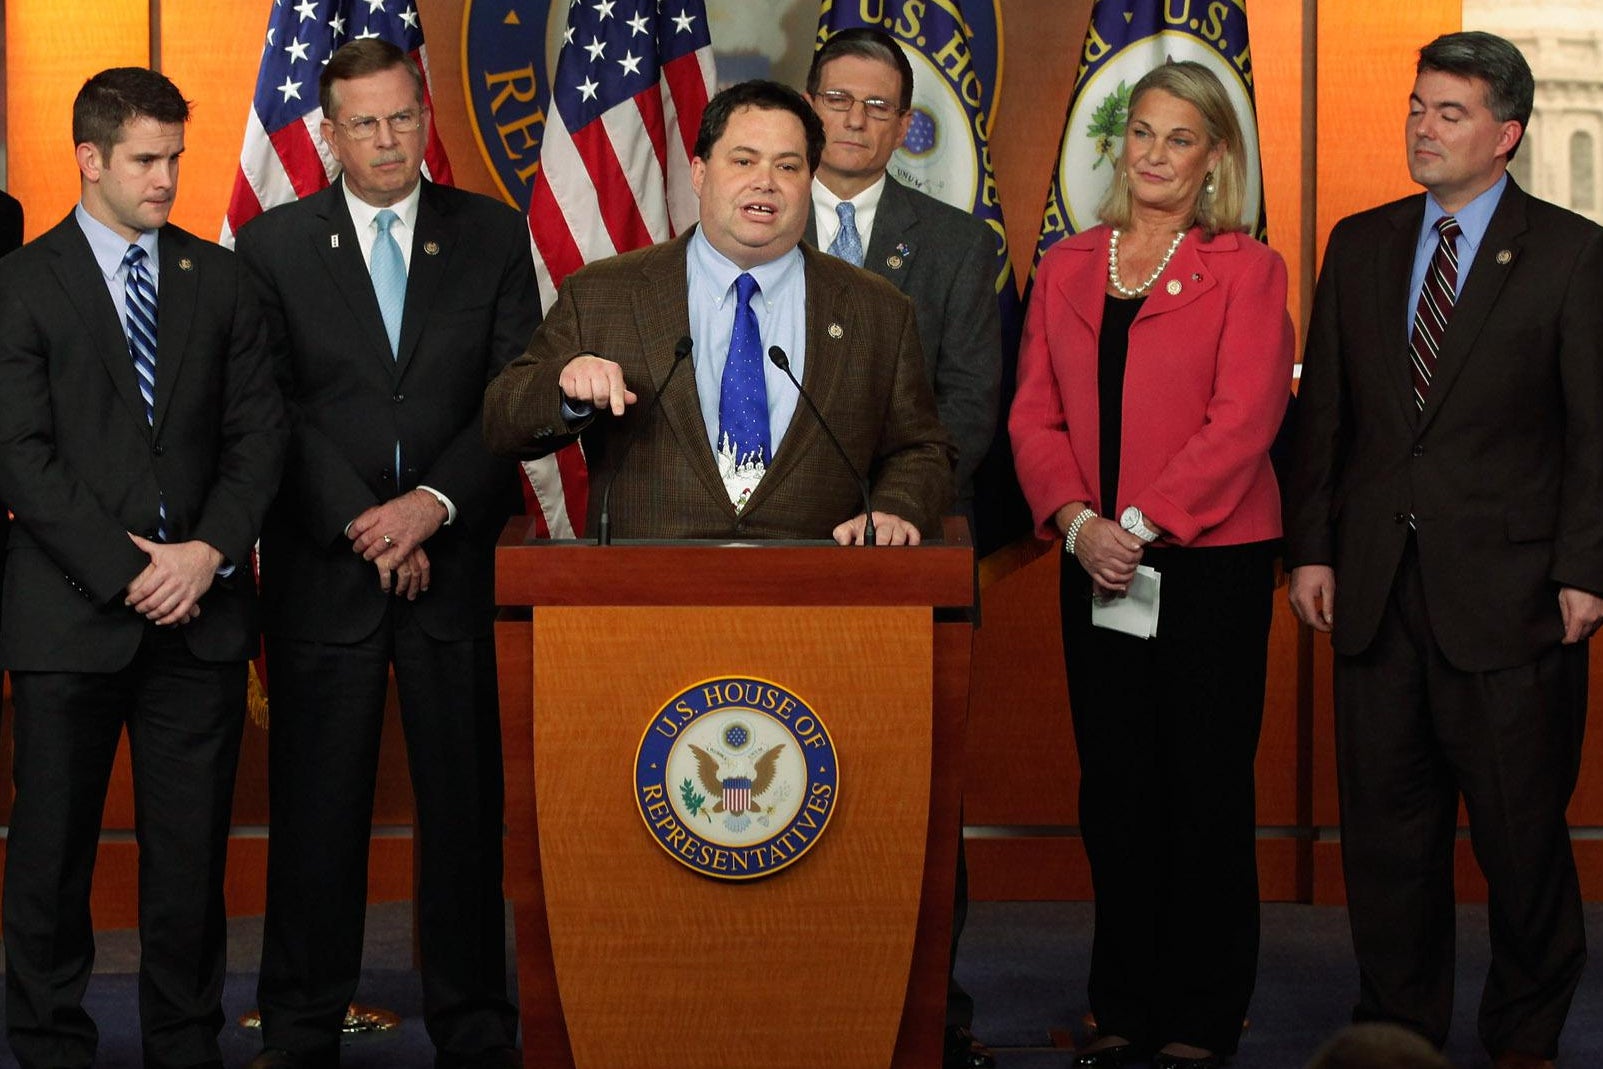 Rep. Blake Farenthold speaks at a news conference with other Republican members of Congress in 2011.